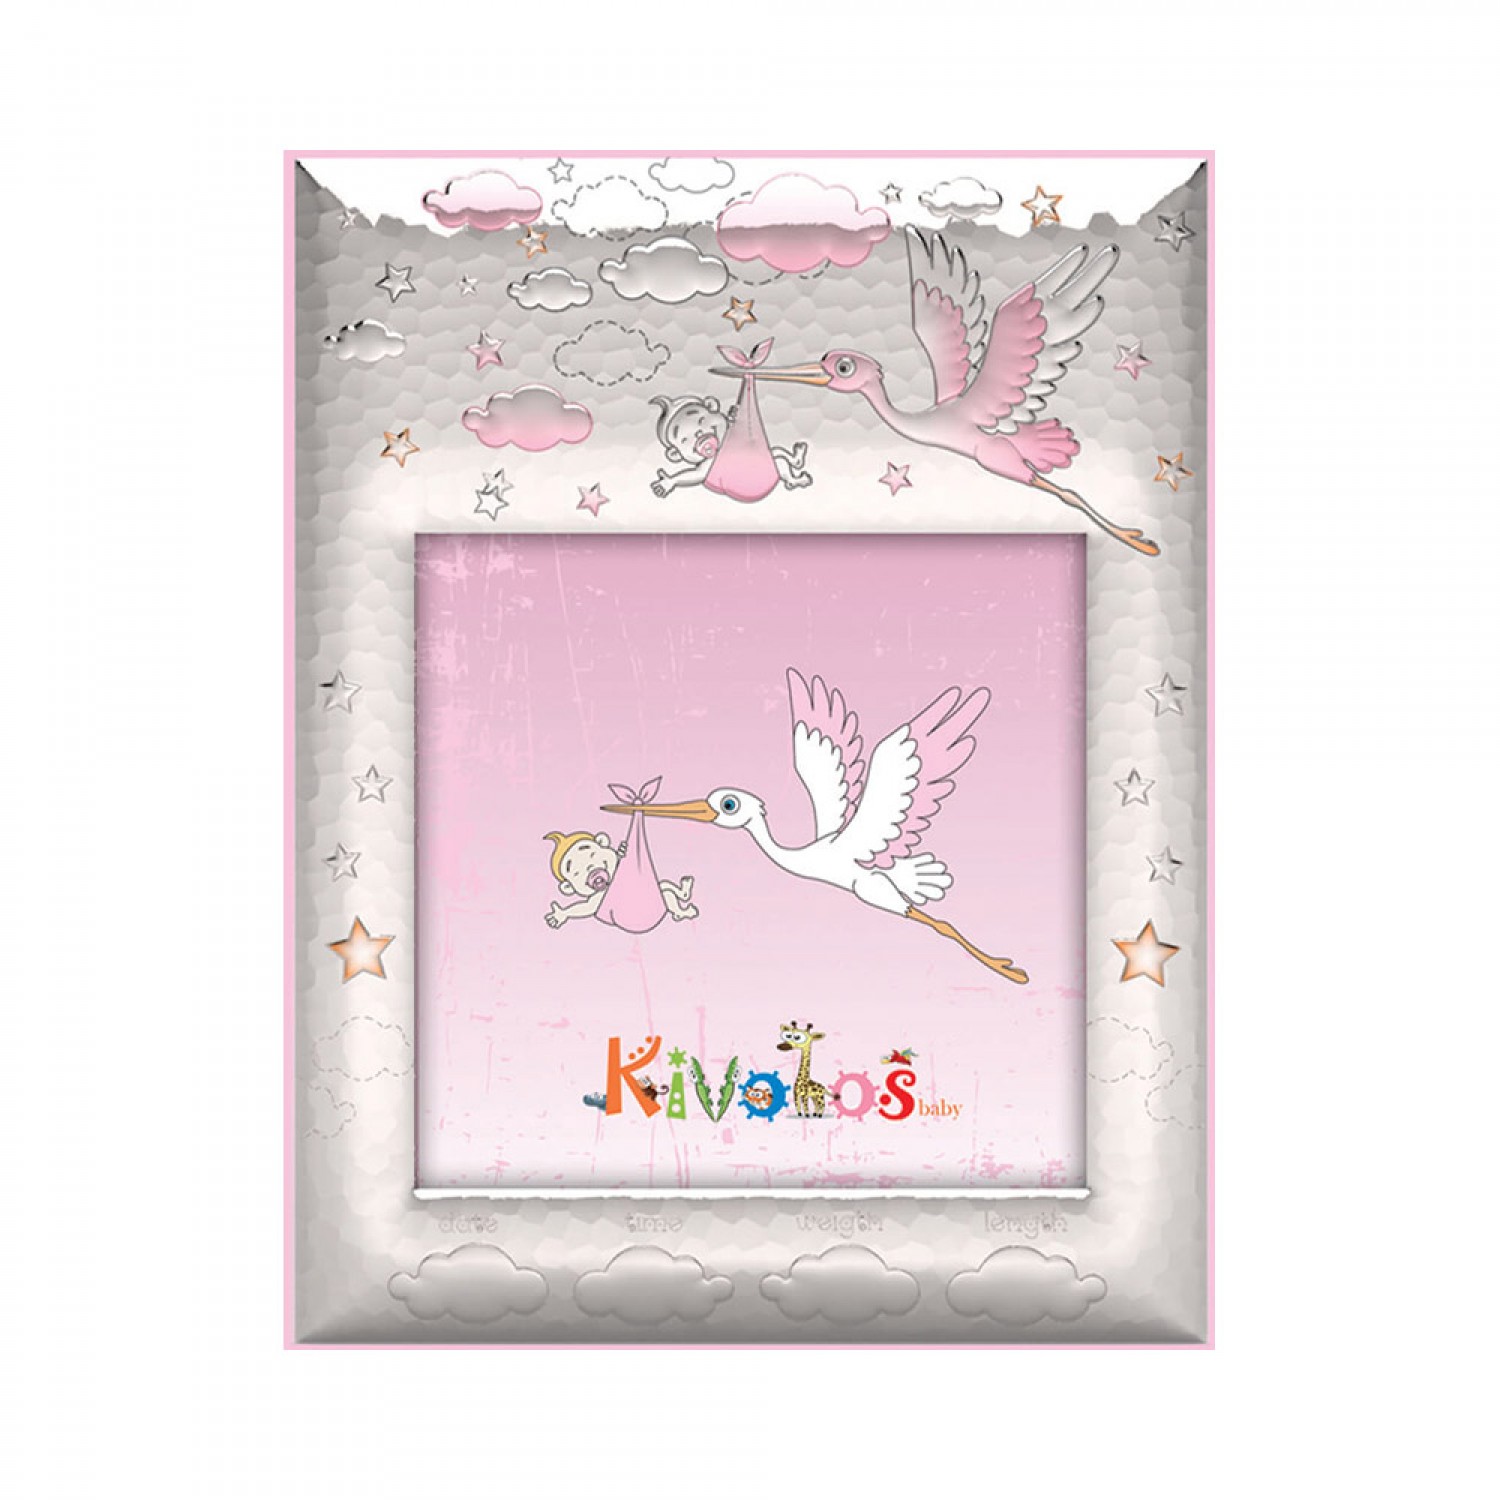 Childrens frame for little girl with stork and clouds 10X10.